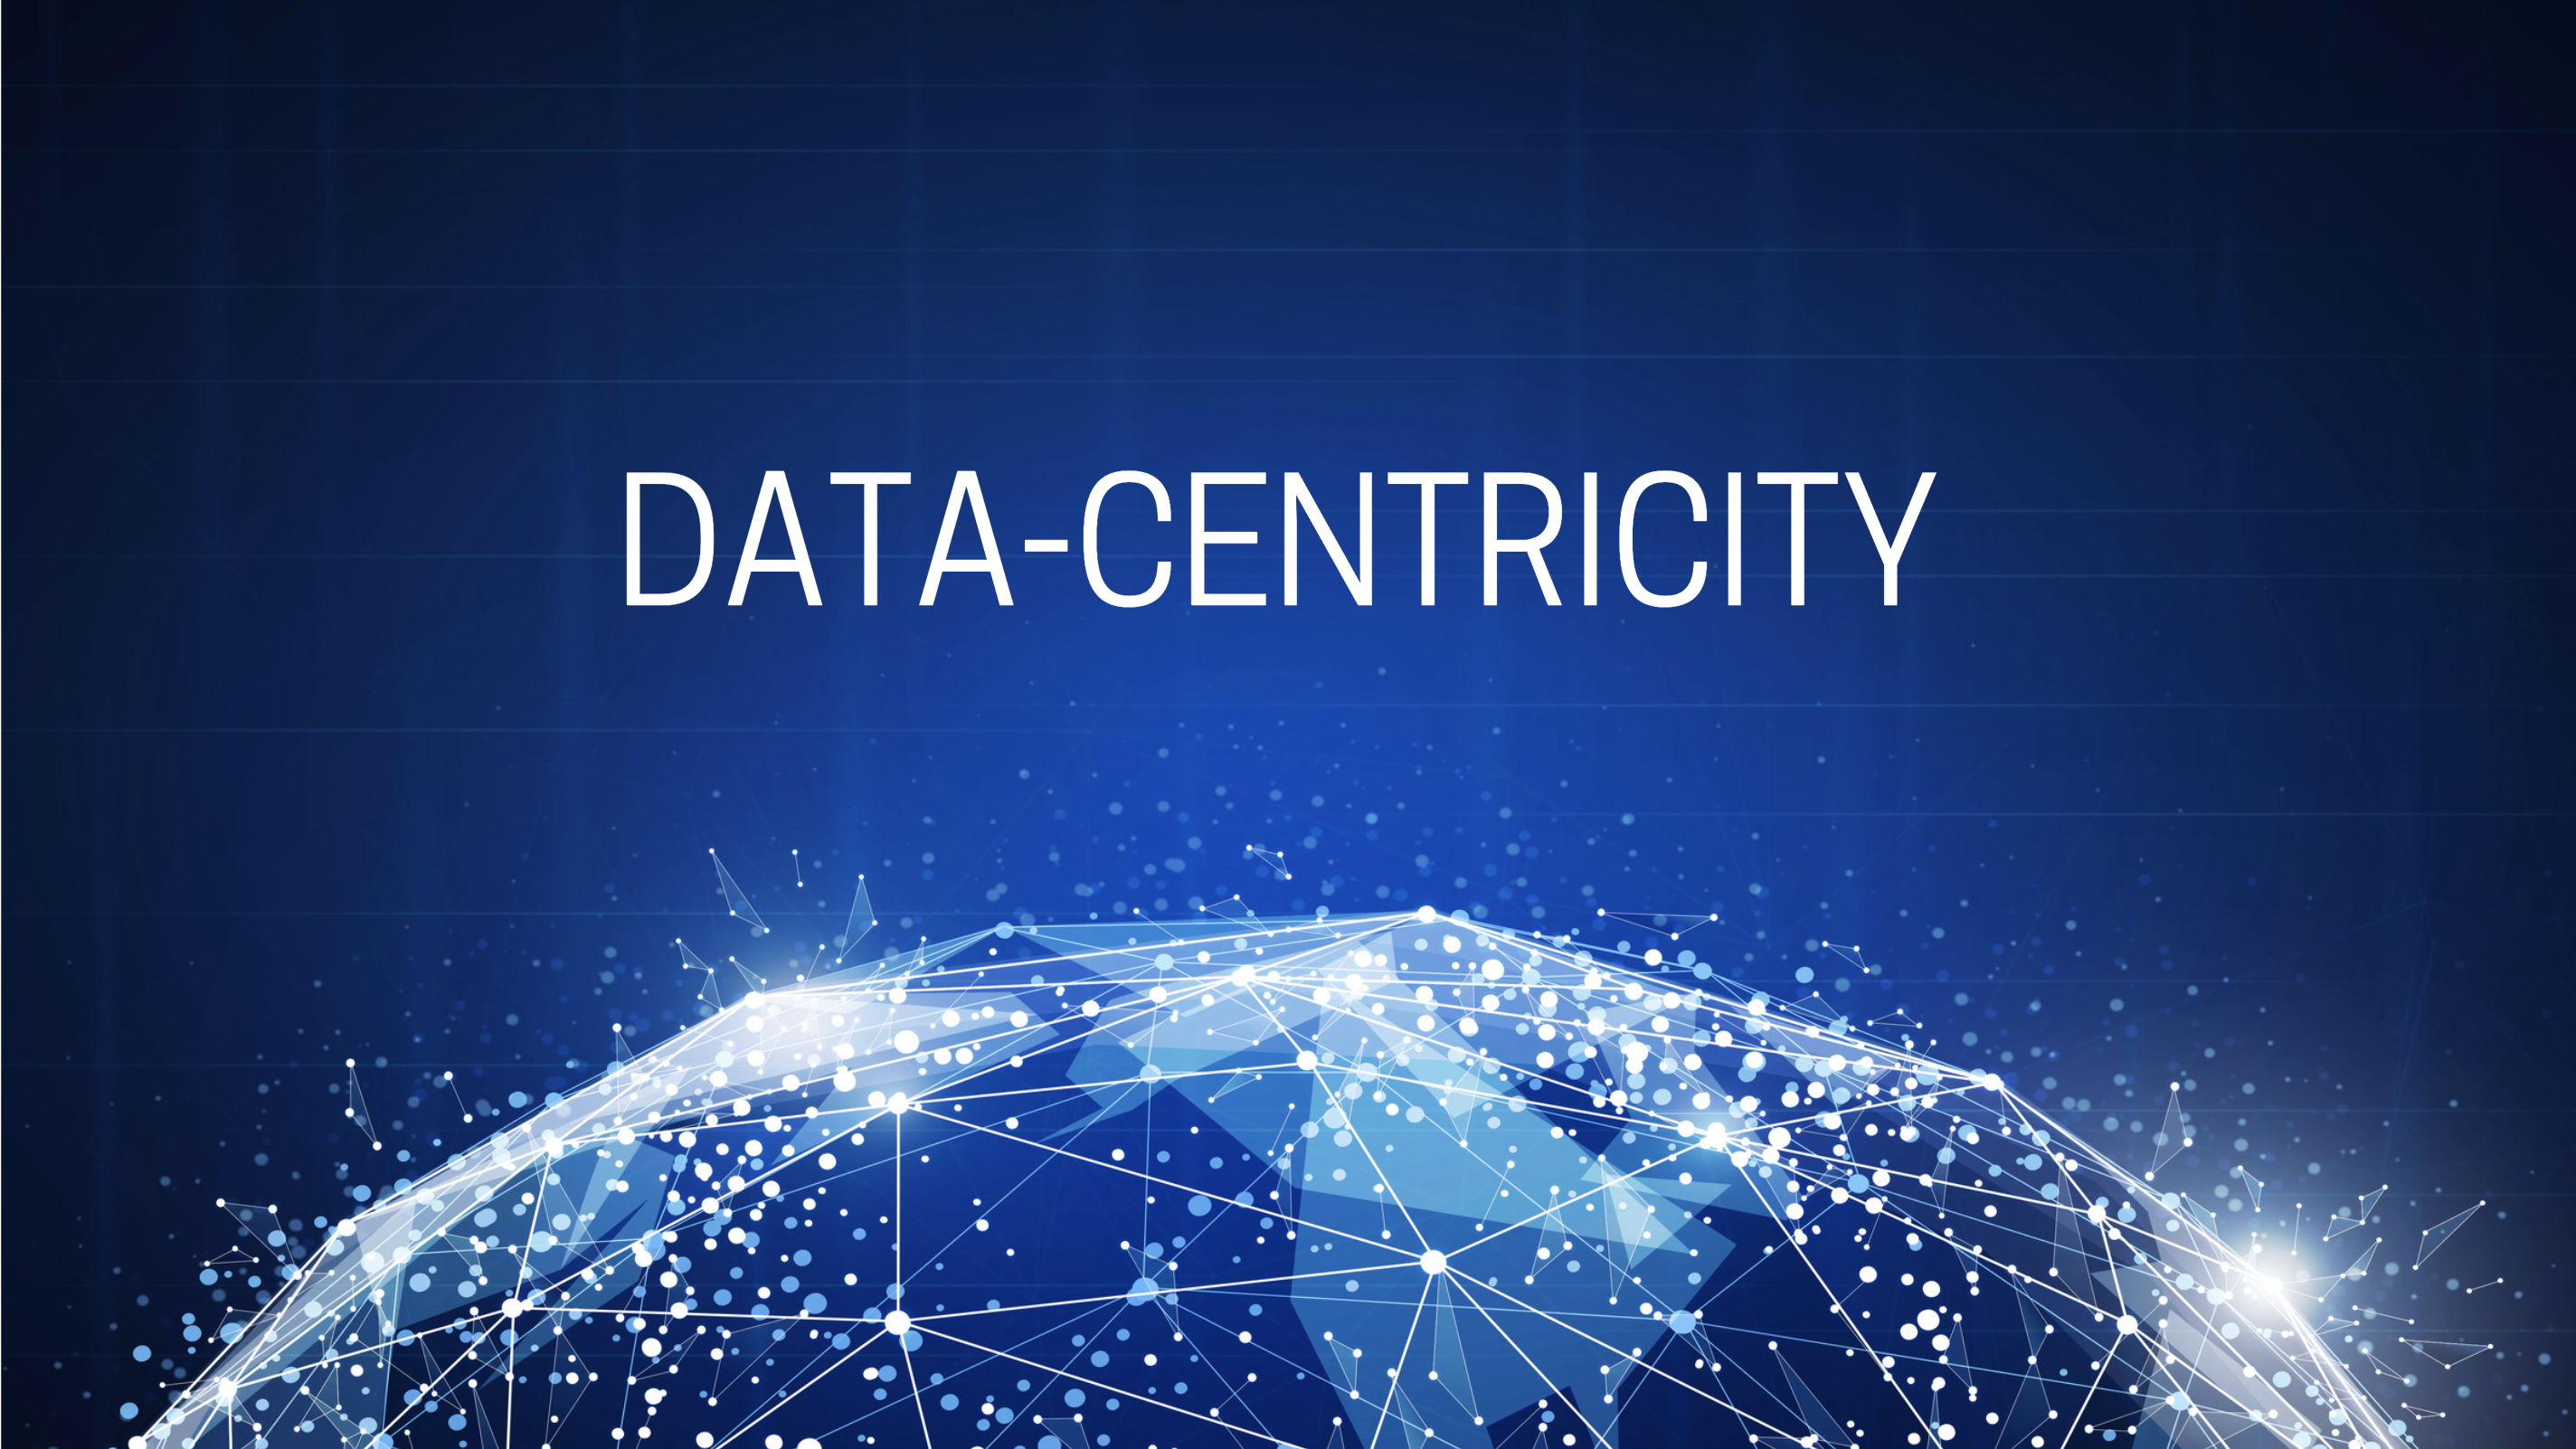 The platform to focus on the most valuable asset: Data-Centric Architecture.